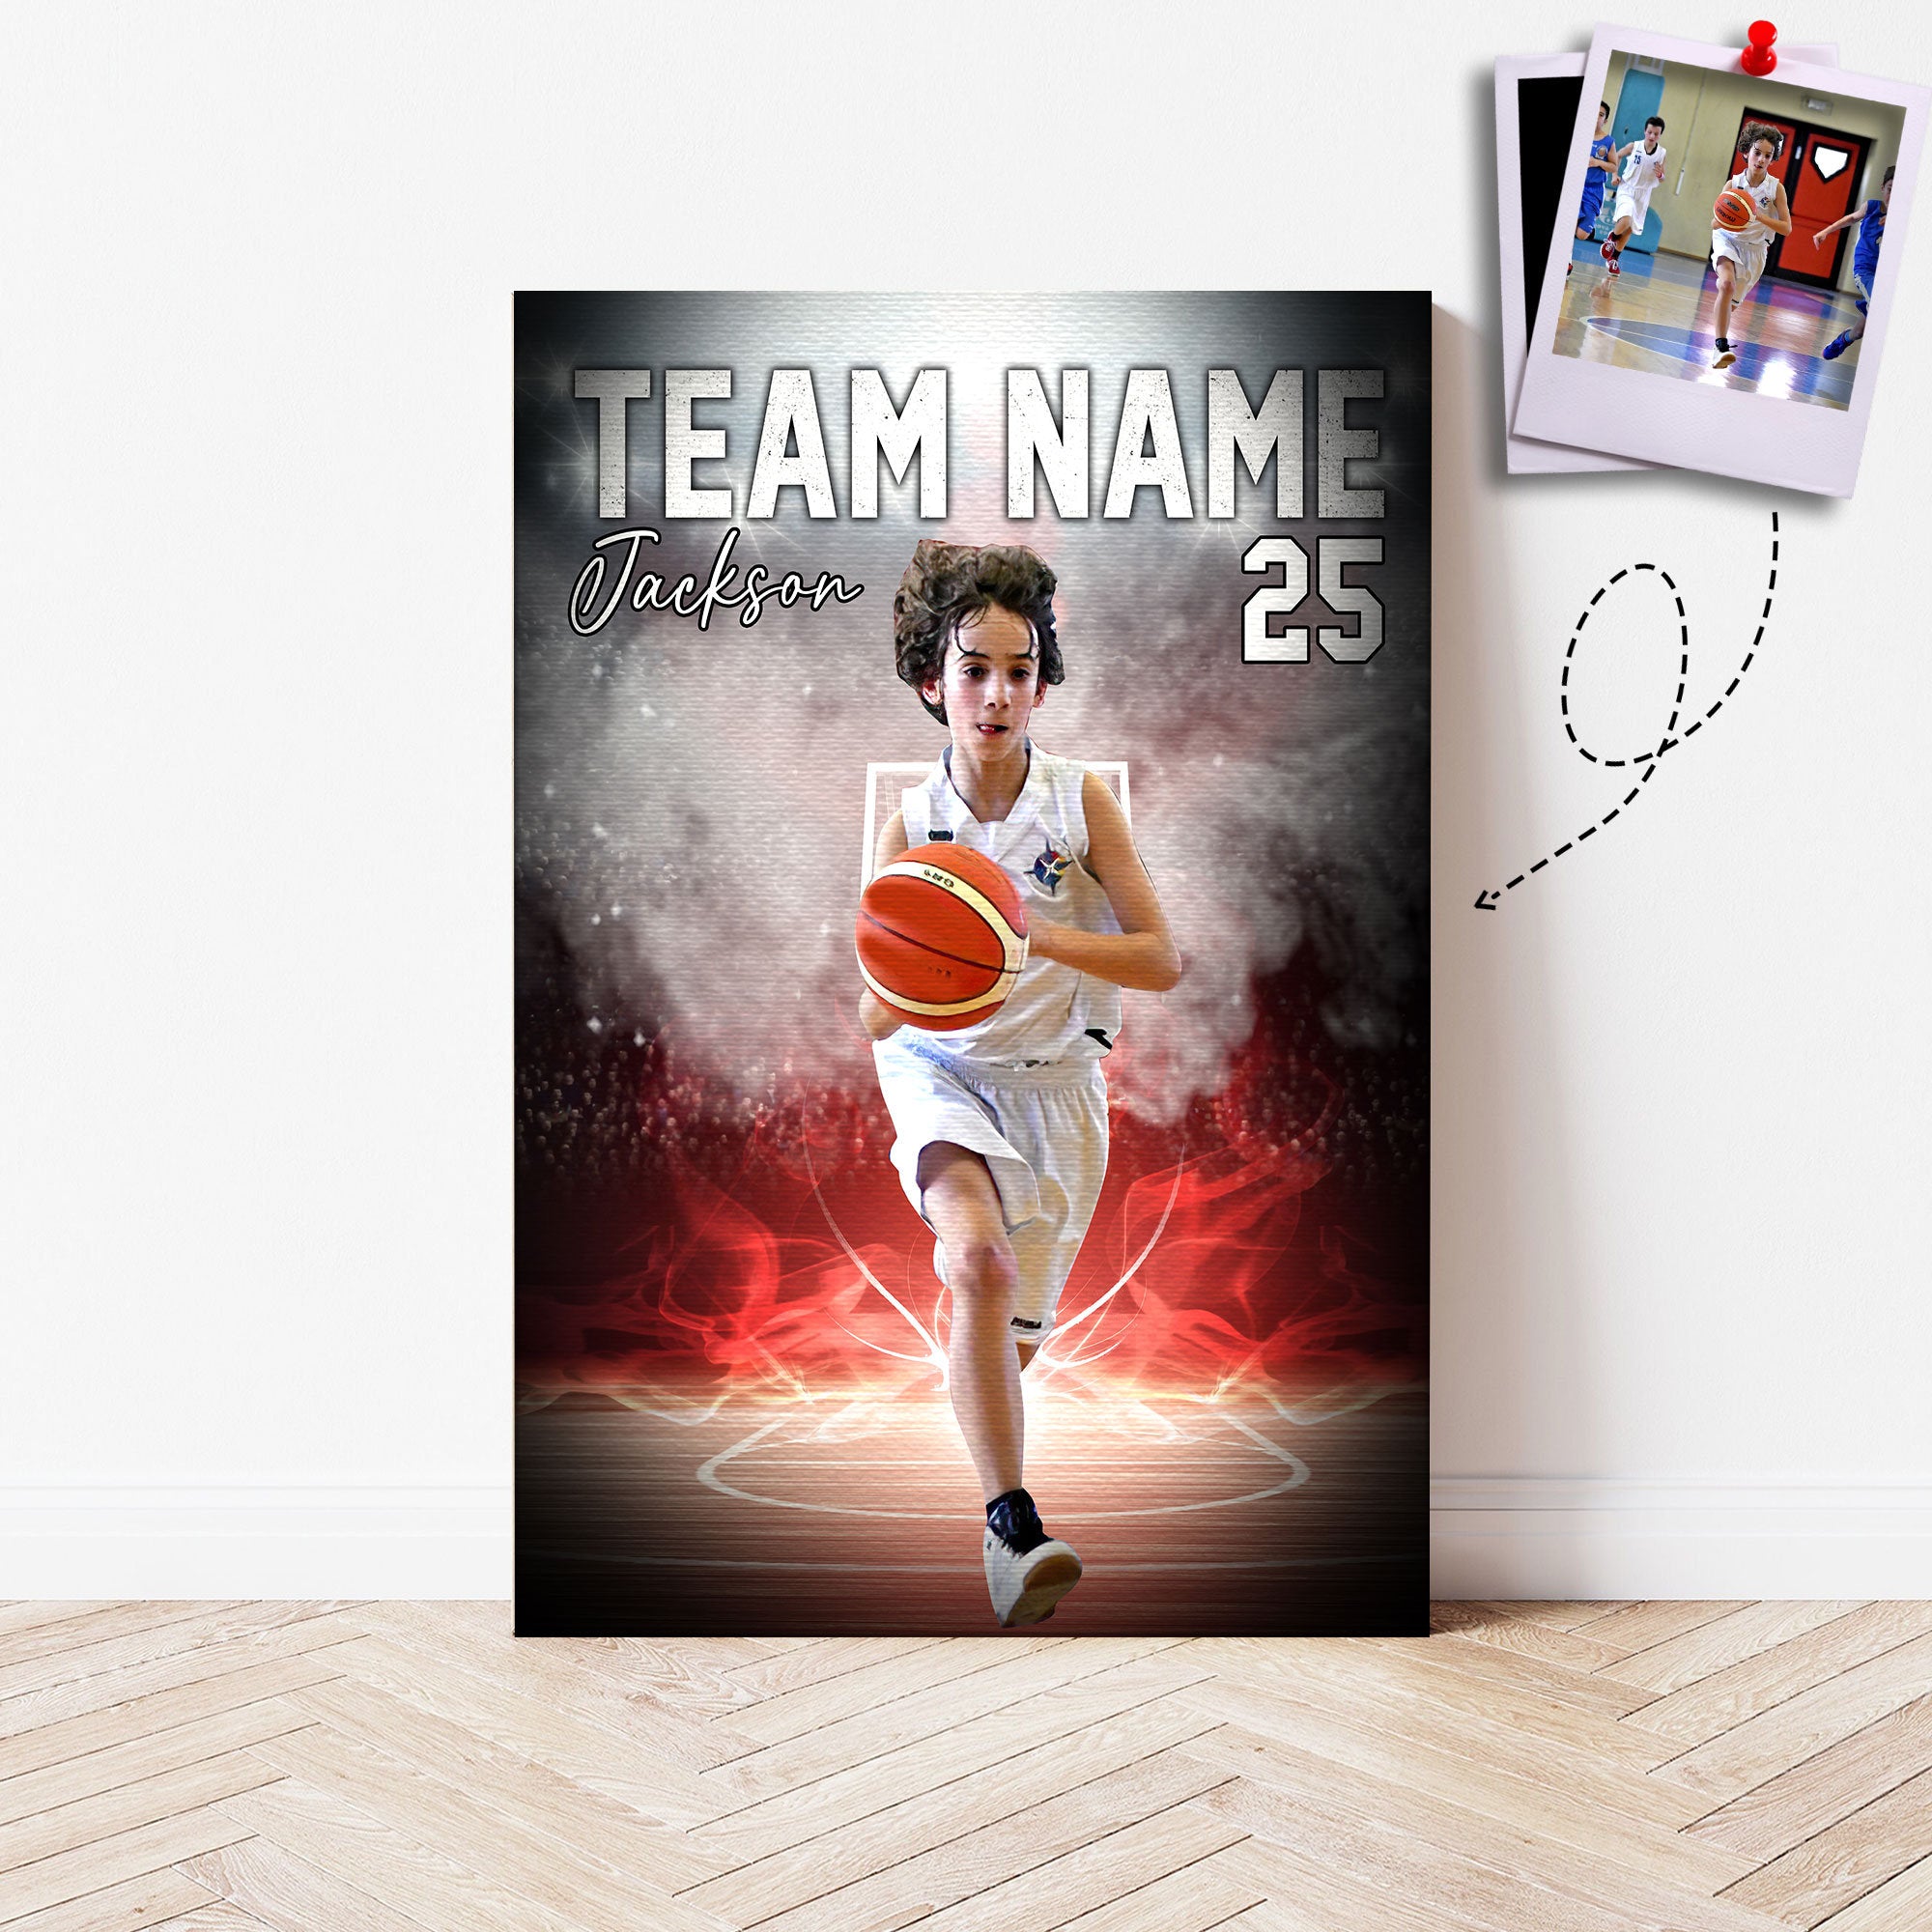 Personalized Photo Basketball Poster/Canvas, Custom Photo Wall Art Print, Framed Canvas, Basketball Gift for Dad, Husband, Boyfriend, Son